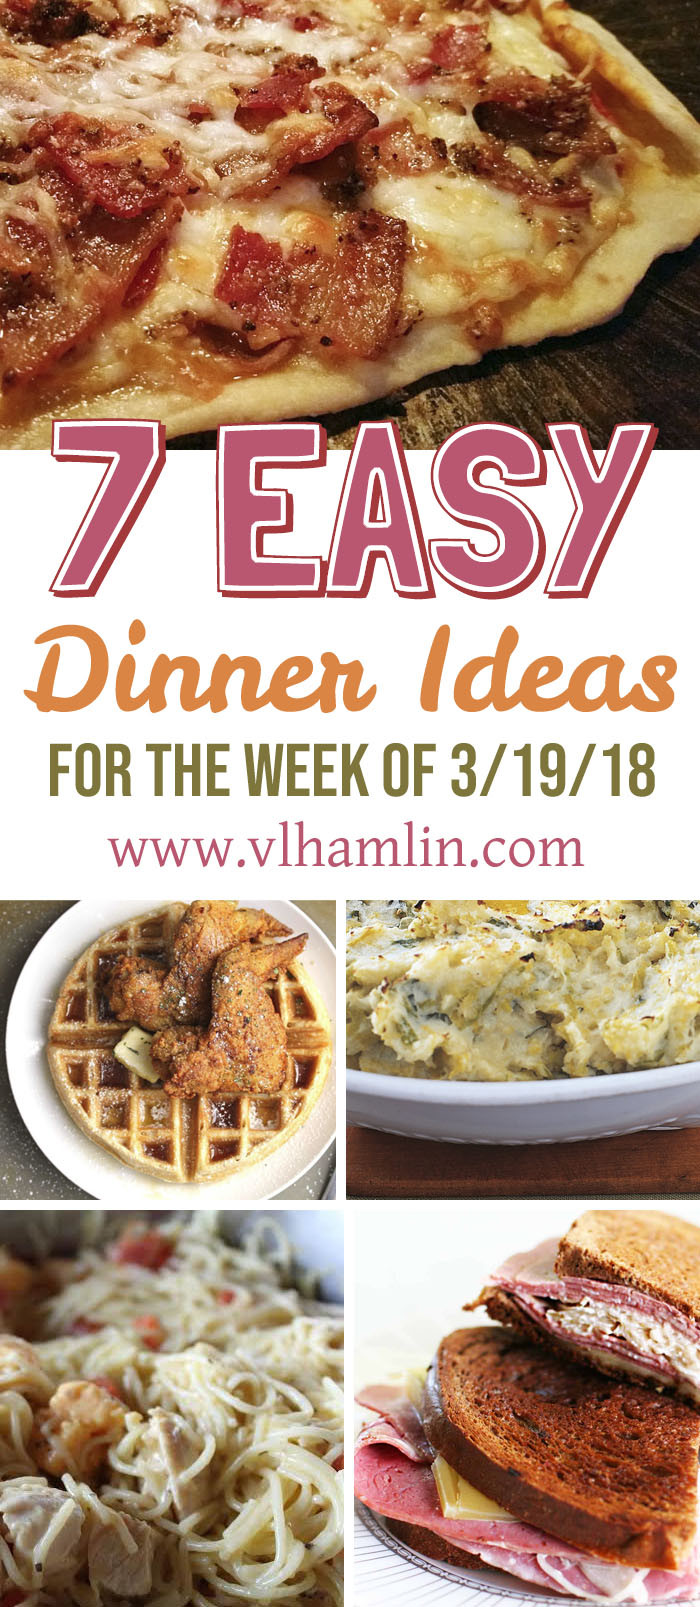 Dinners Ideas For The Week
 7 Dinner Ideas for the Week of 3 19 18 Food Life Design